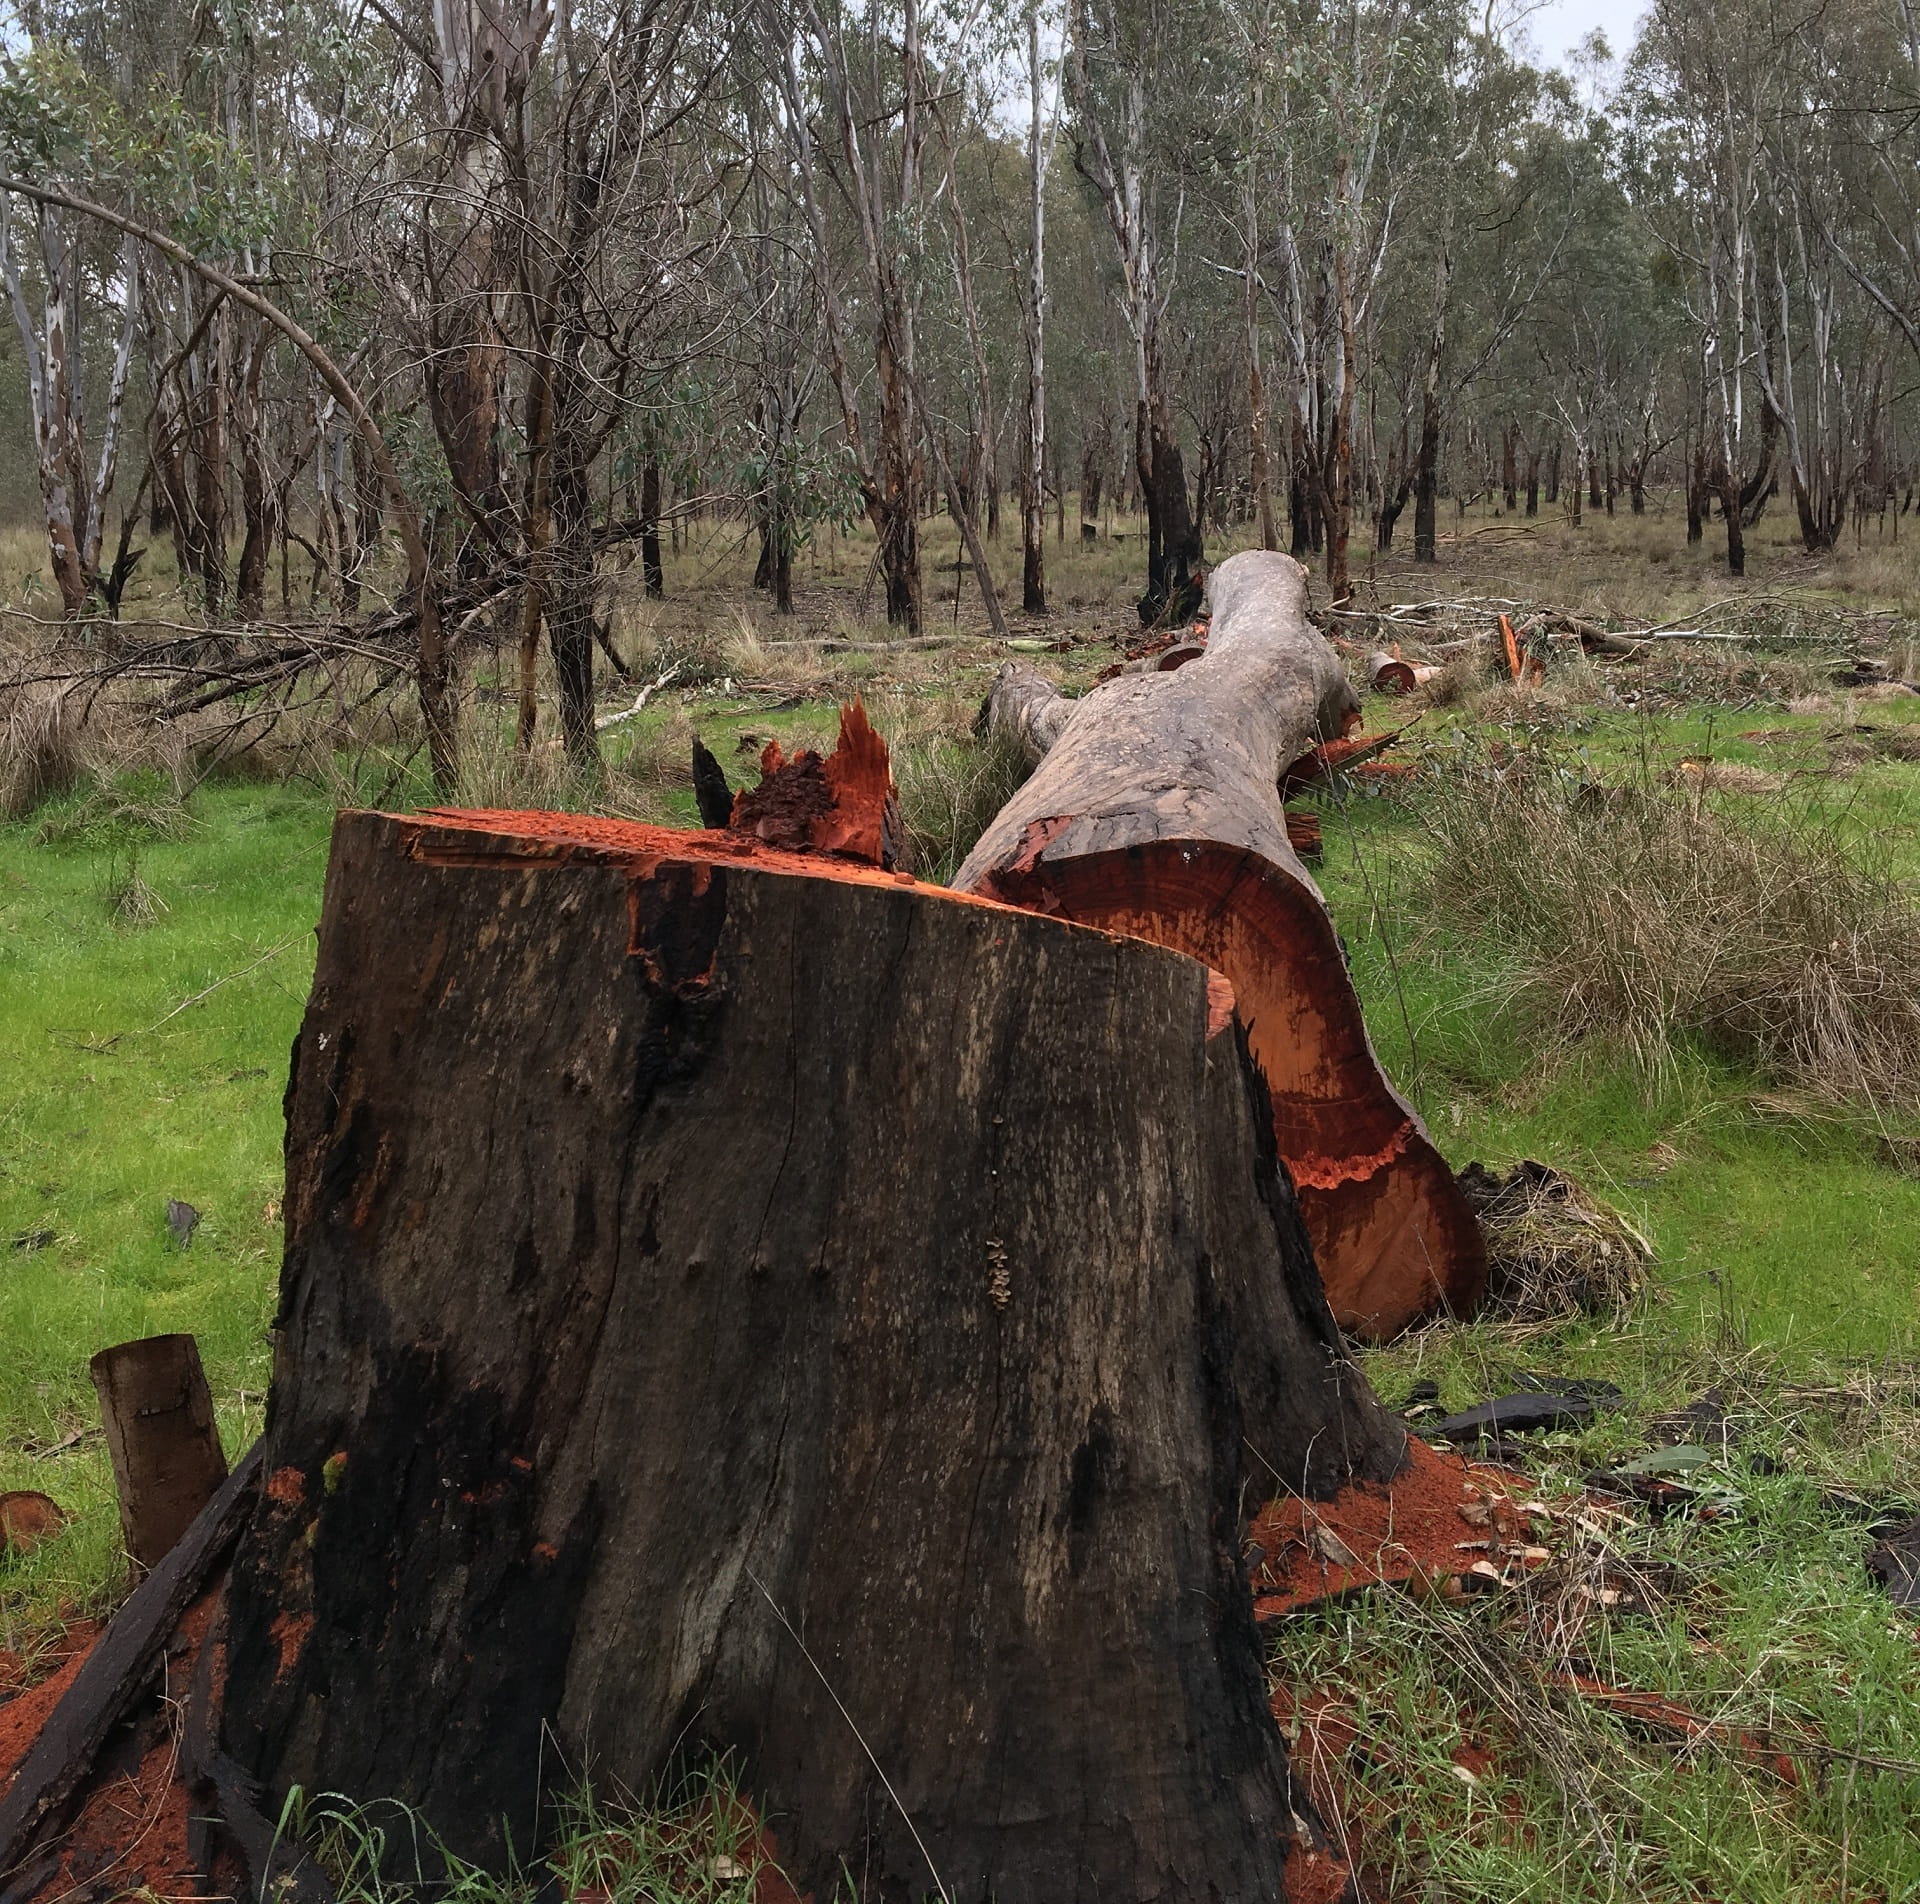 The bright red trunk of an older, illegally cut river red gum surrounded by younger trees in Lower Goulburn National Park